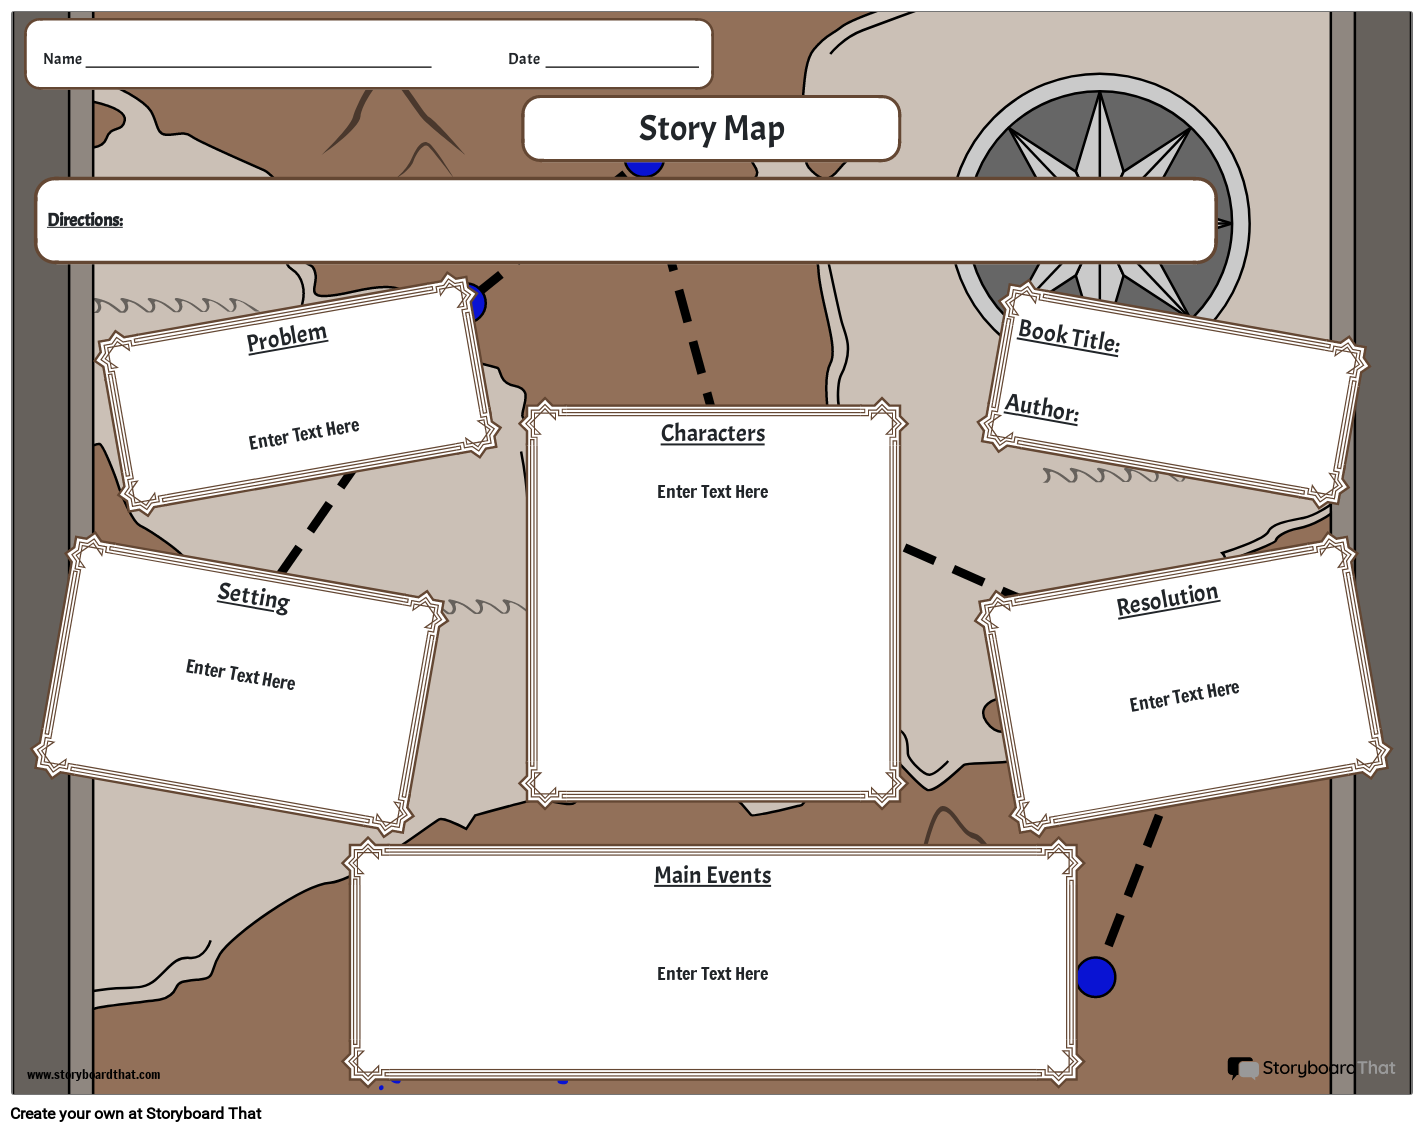 Mapy Historii Storyboard Par Pl Examples